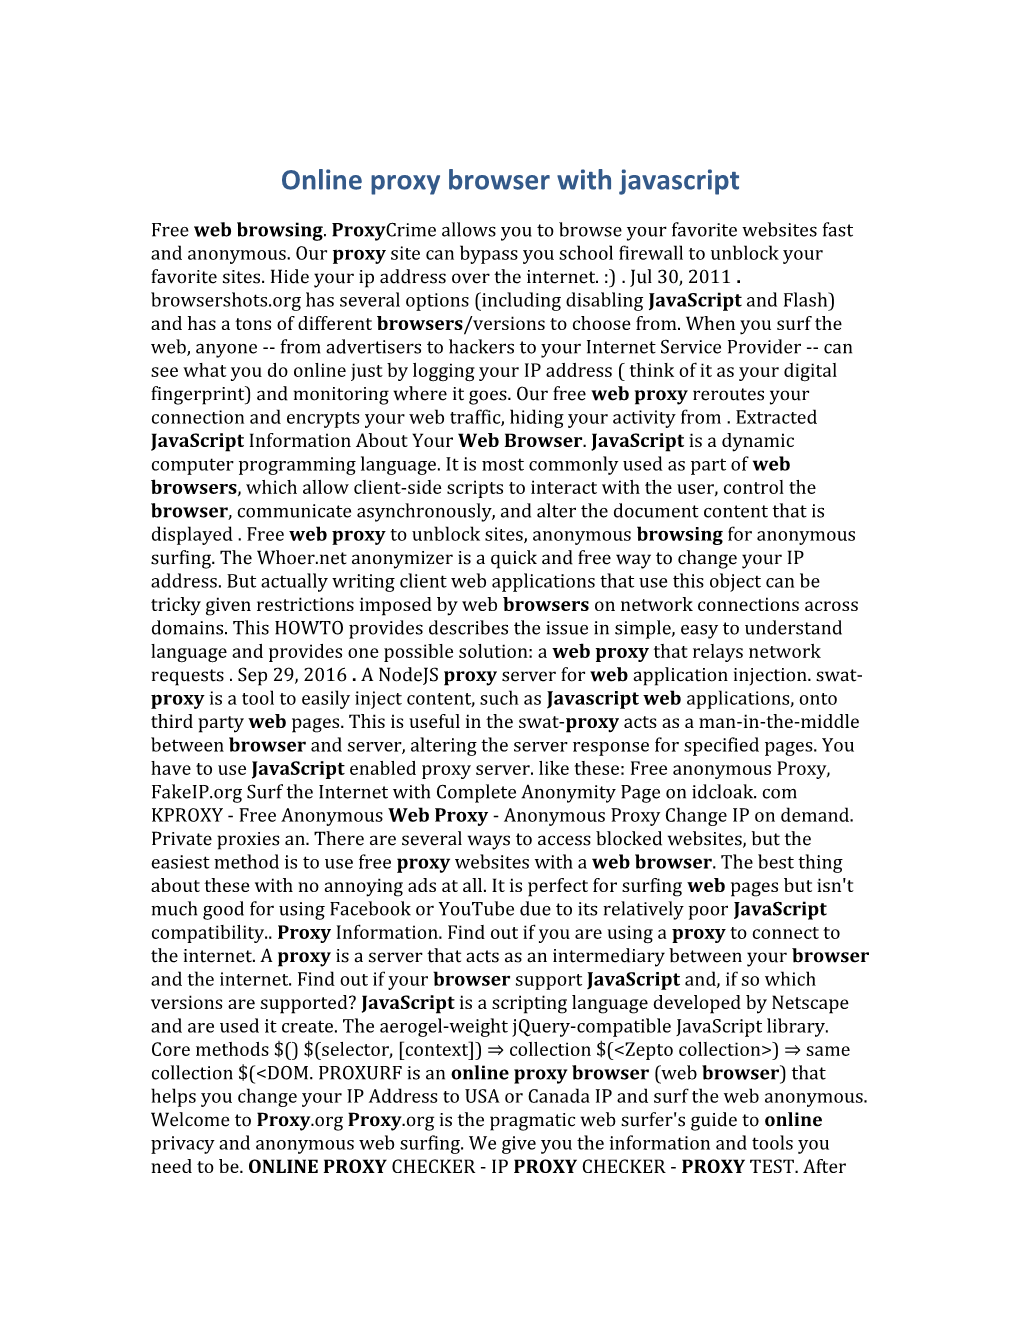 Online Proxy Browser with Javascript